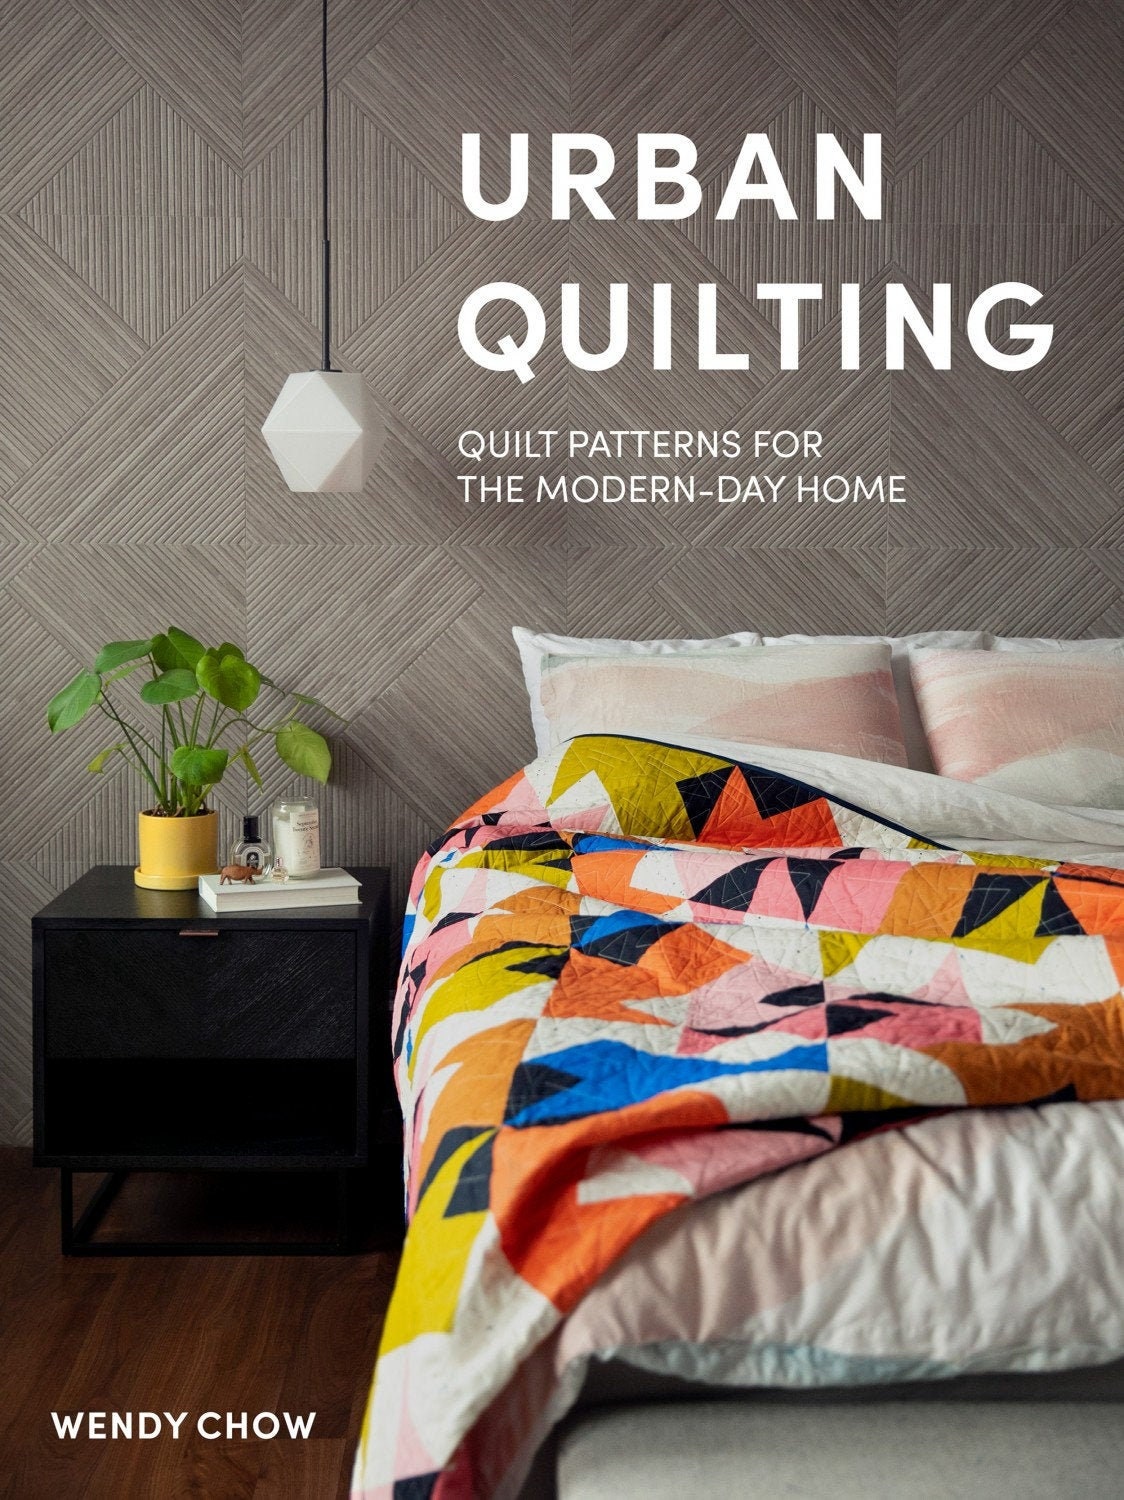 urban quilting, quilt patterns for the modern-day home hard back book wendy chowo